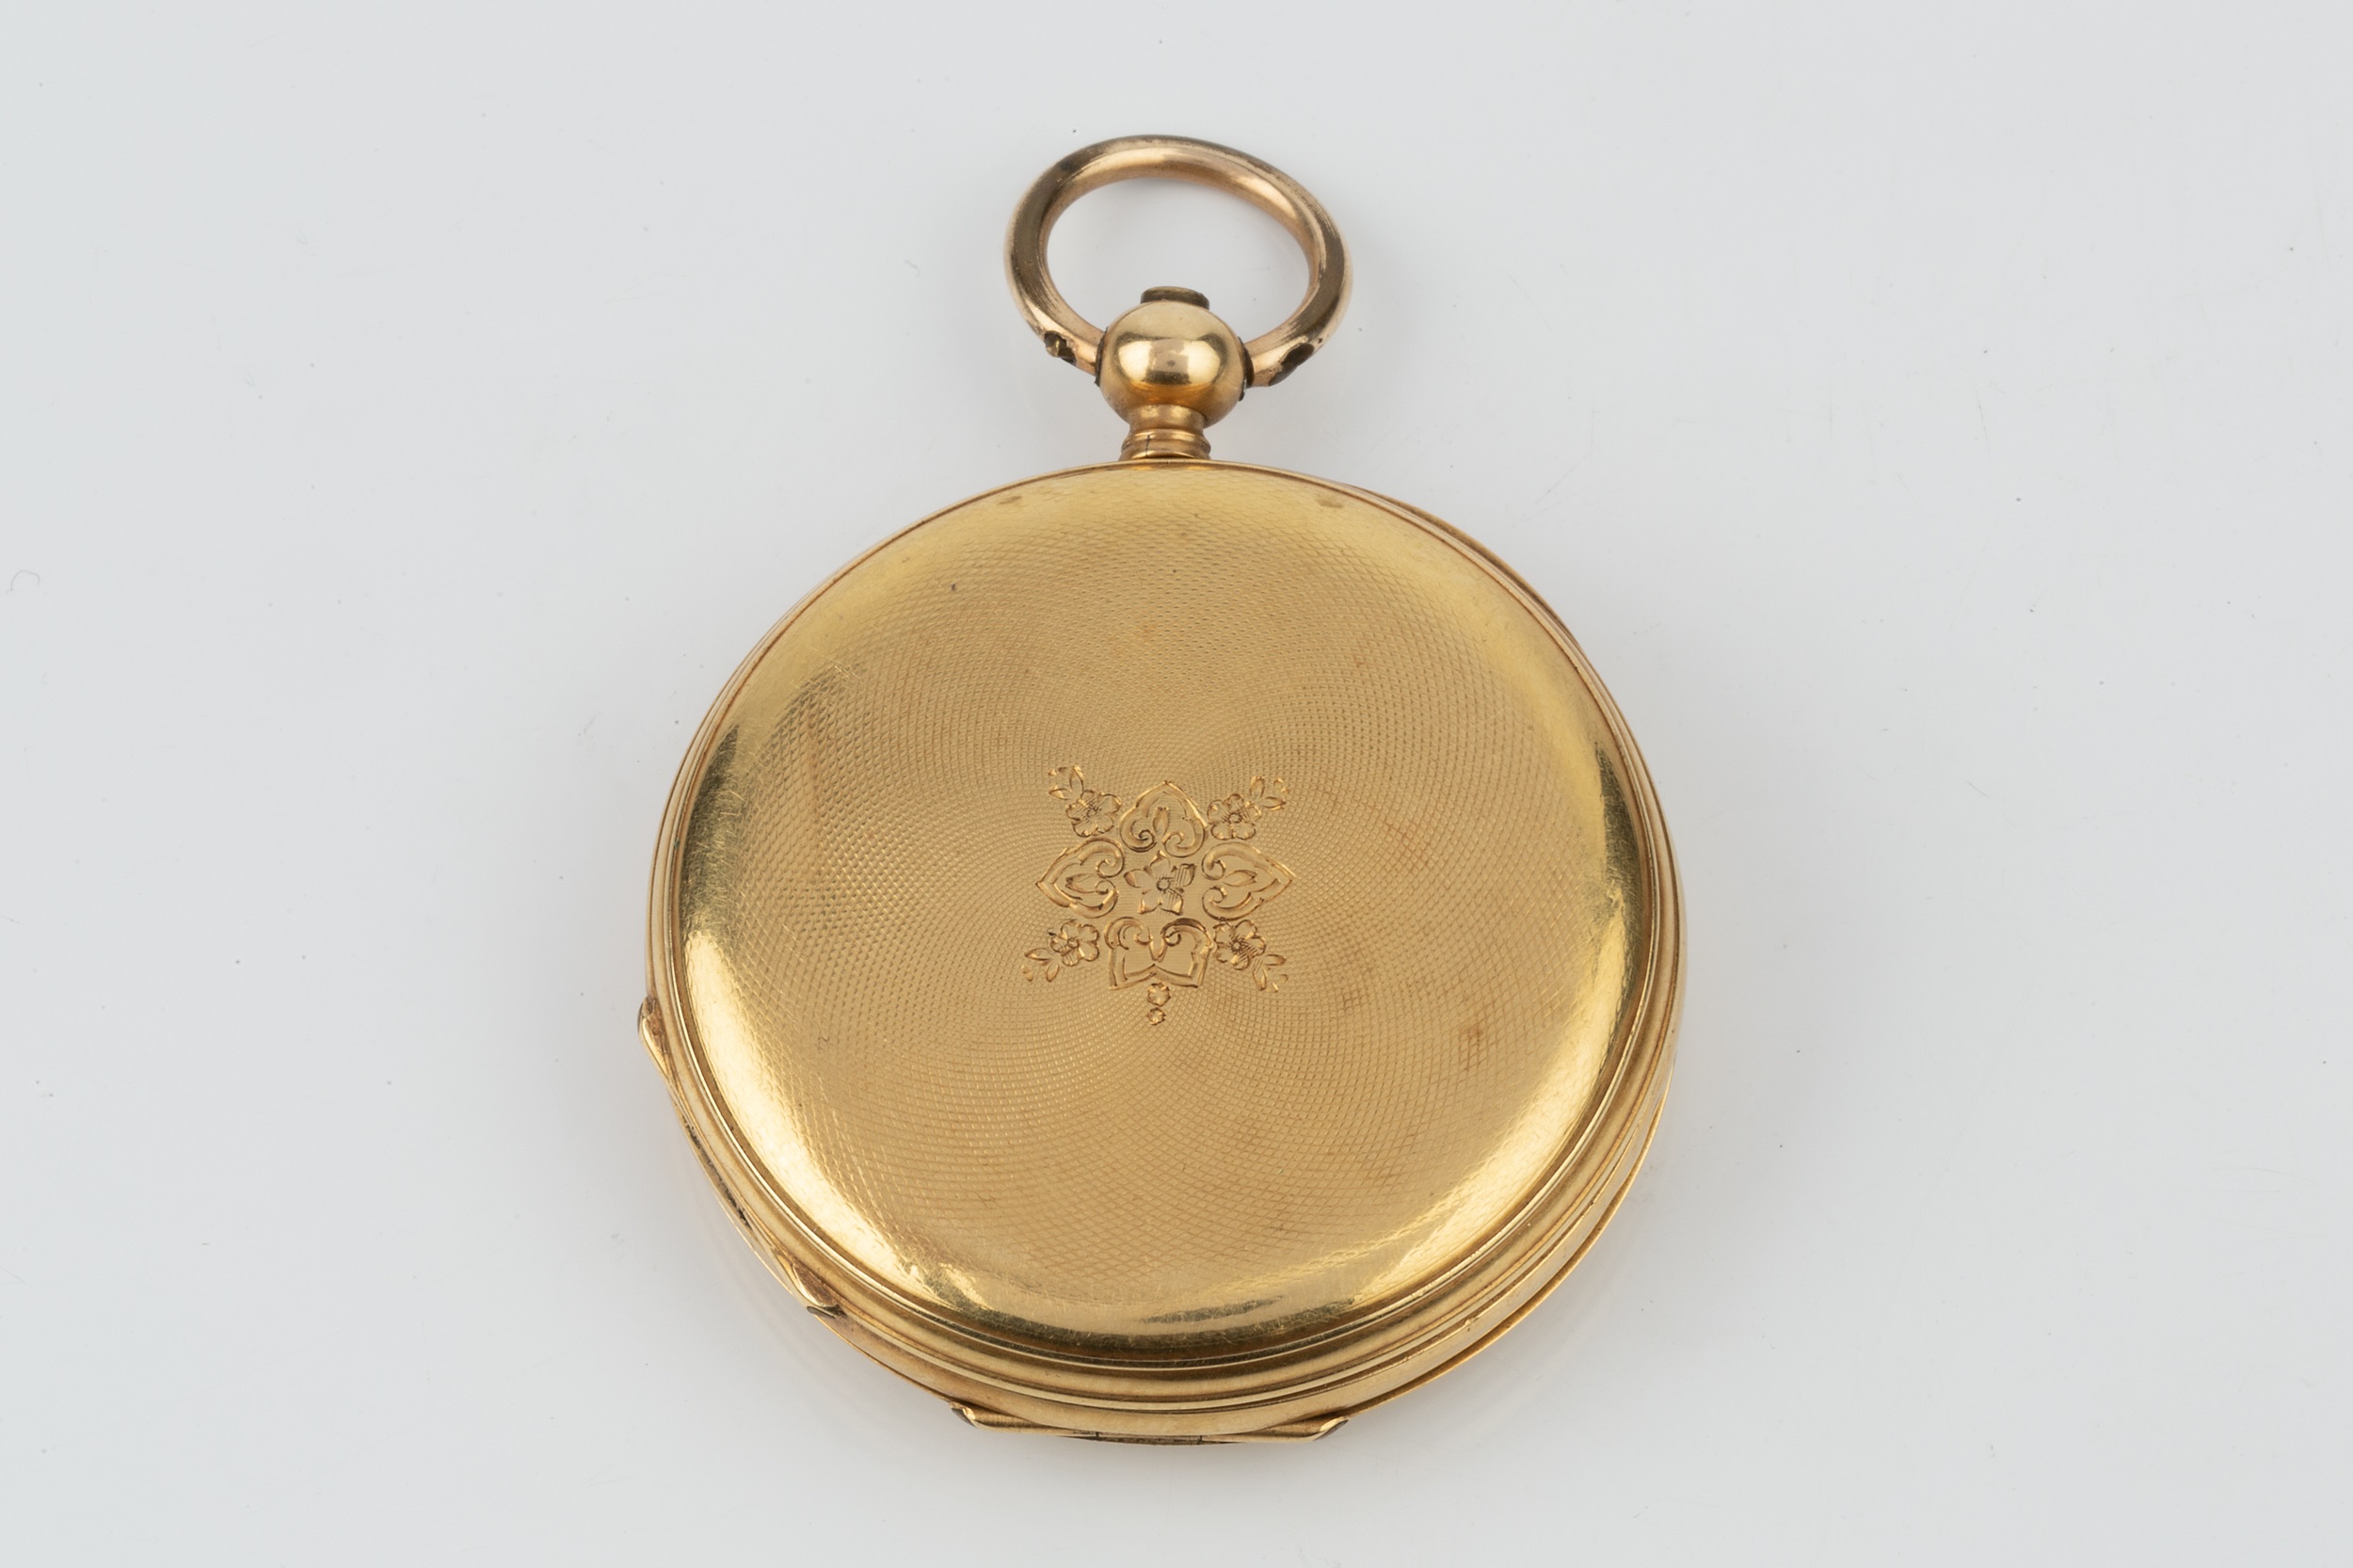 A Continental 18k gold hunter pocket watch, the engine turned front engraved with a cherub, - Image 3 of 6